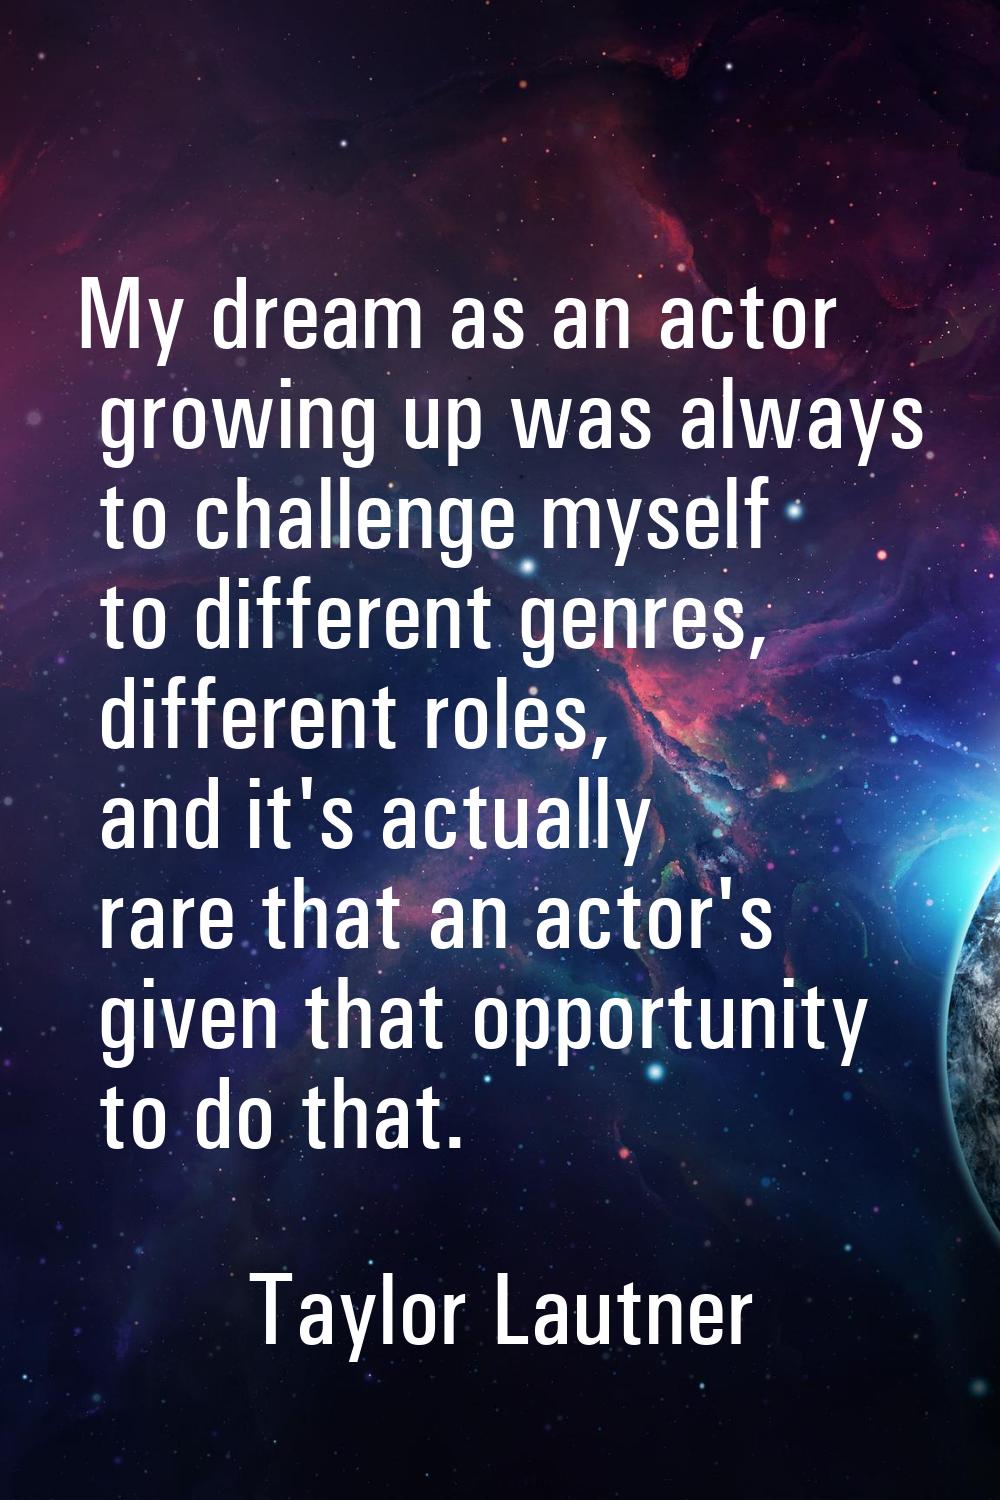 My dream as an actor growing up was always to challenge myself to different genres, different roles